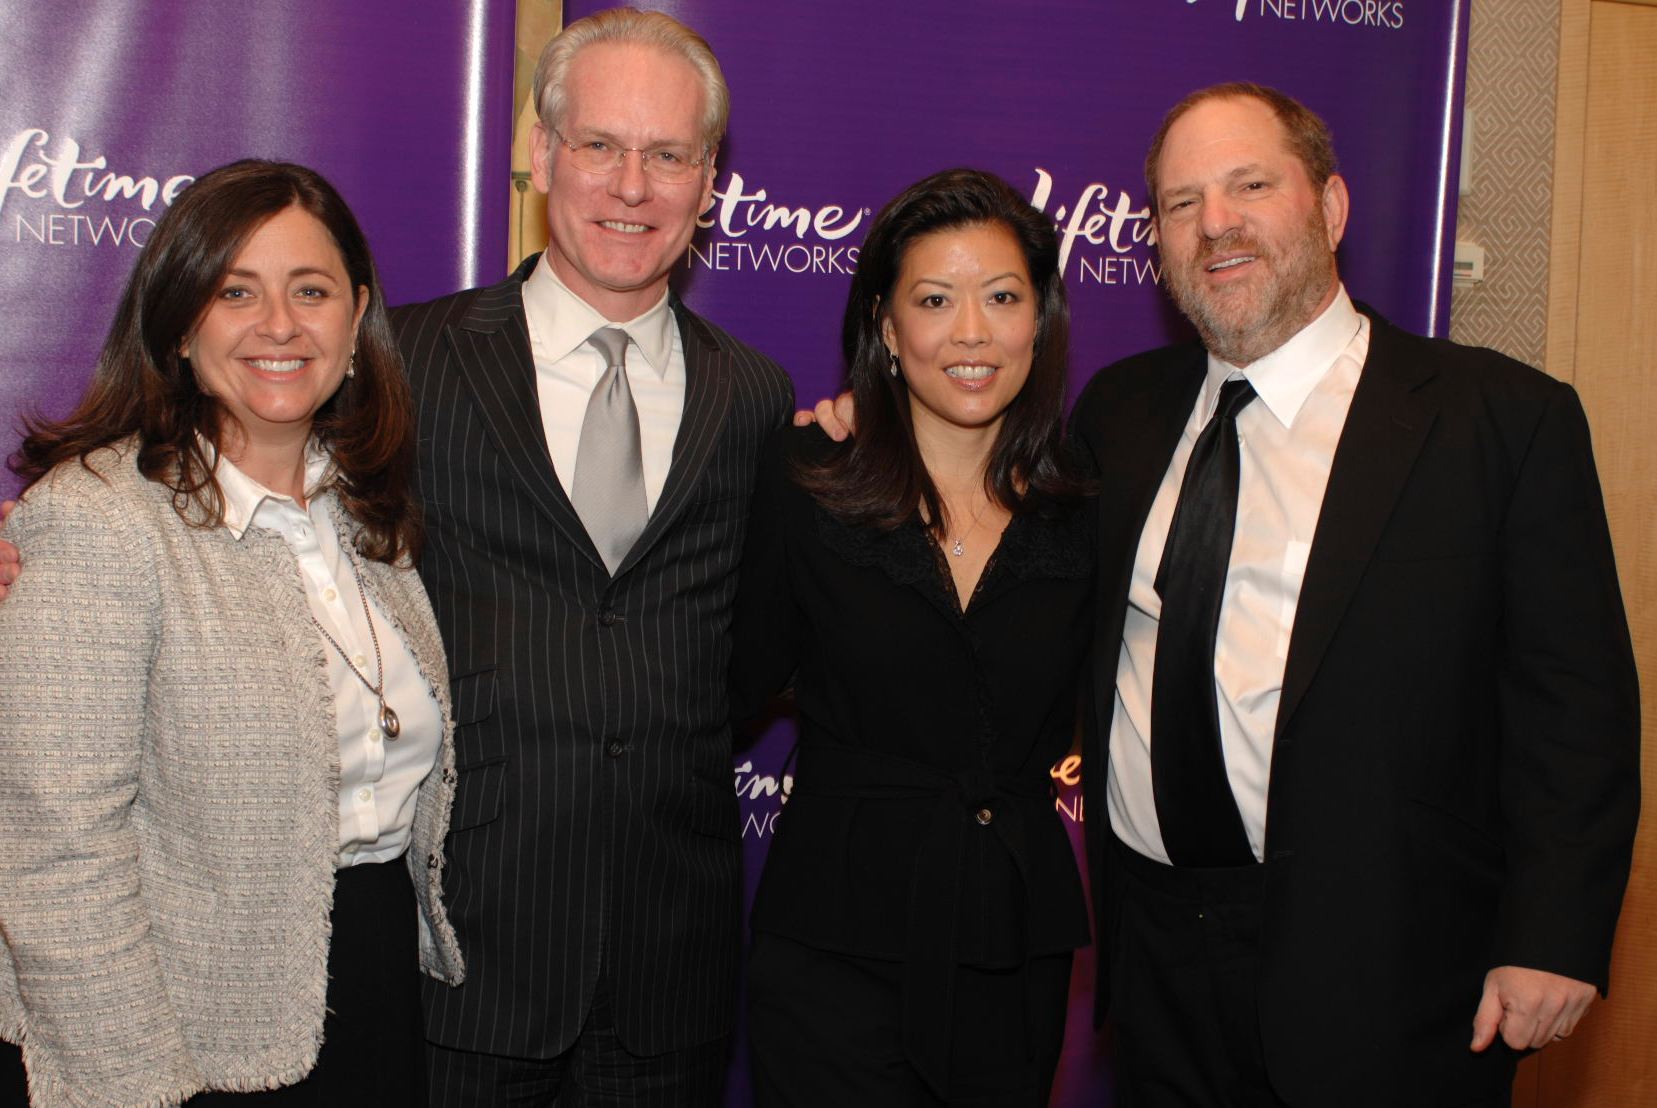 Cover image for  article: Can "Project Runway" "Make It Work" With Lifetime? Weinstein, Gunn and Klum Think So.